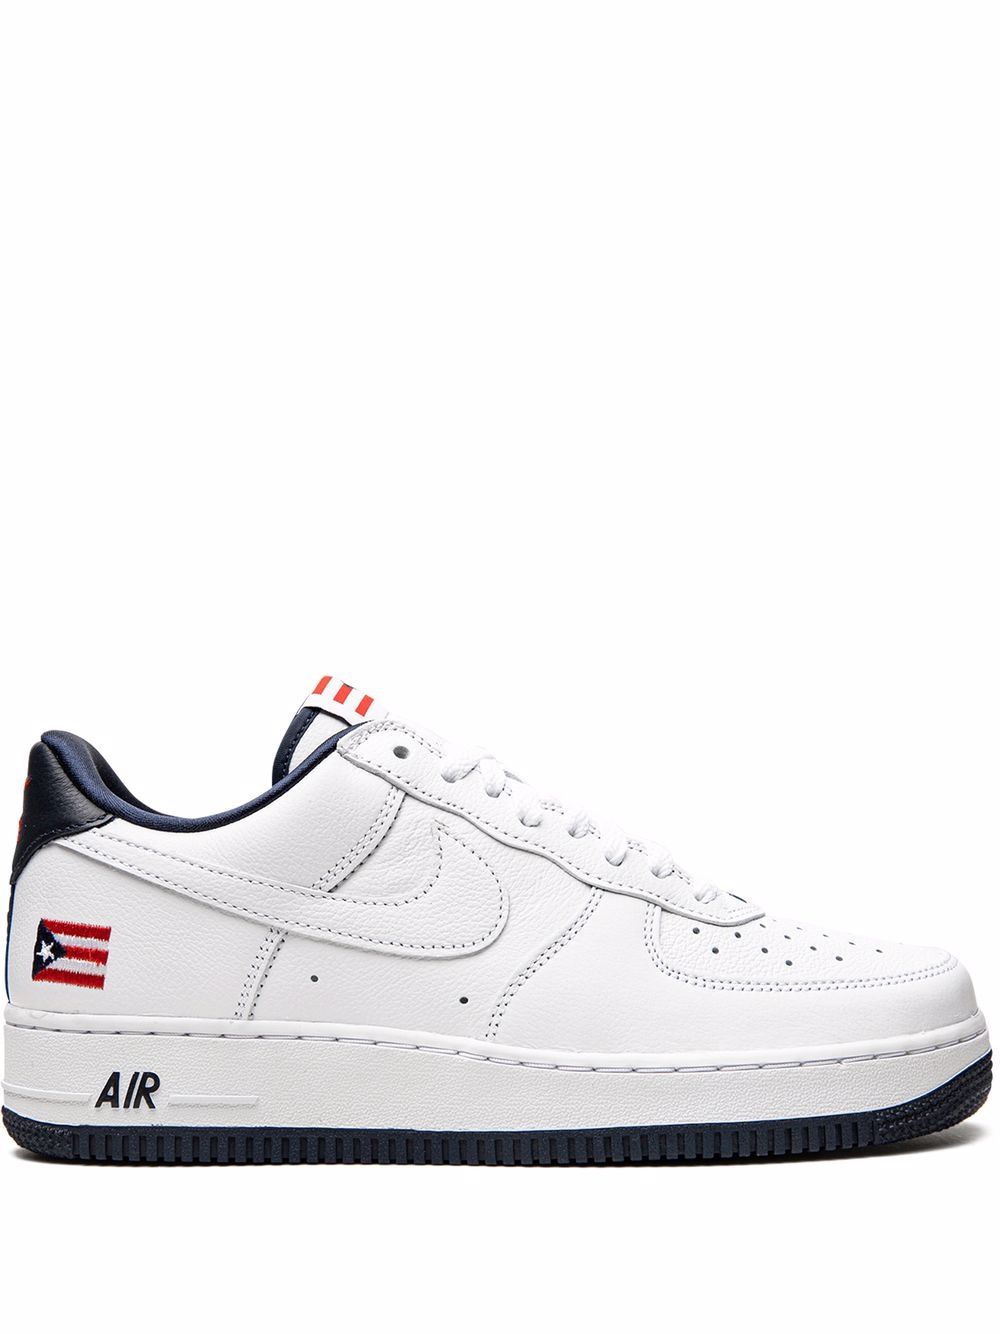 Nike Air Force 1 Low "Puerto Rico" sneakers - White von Nike